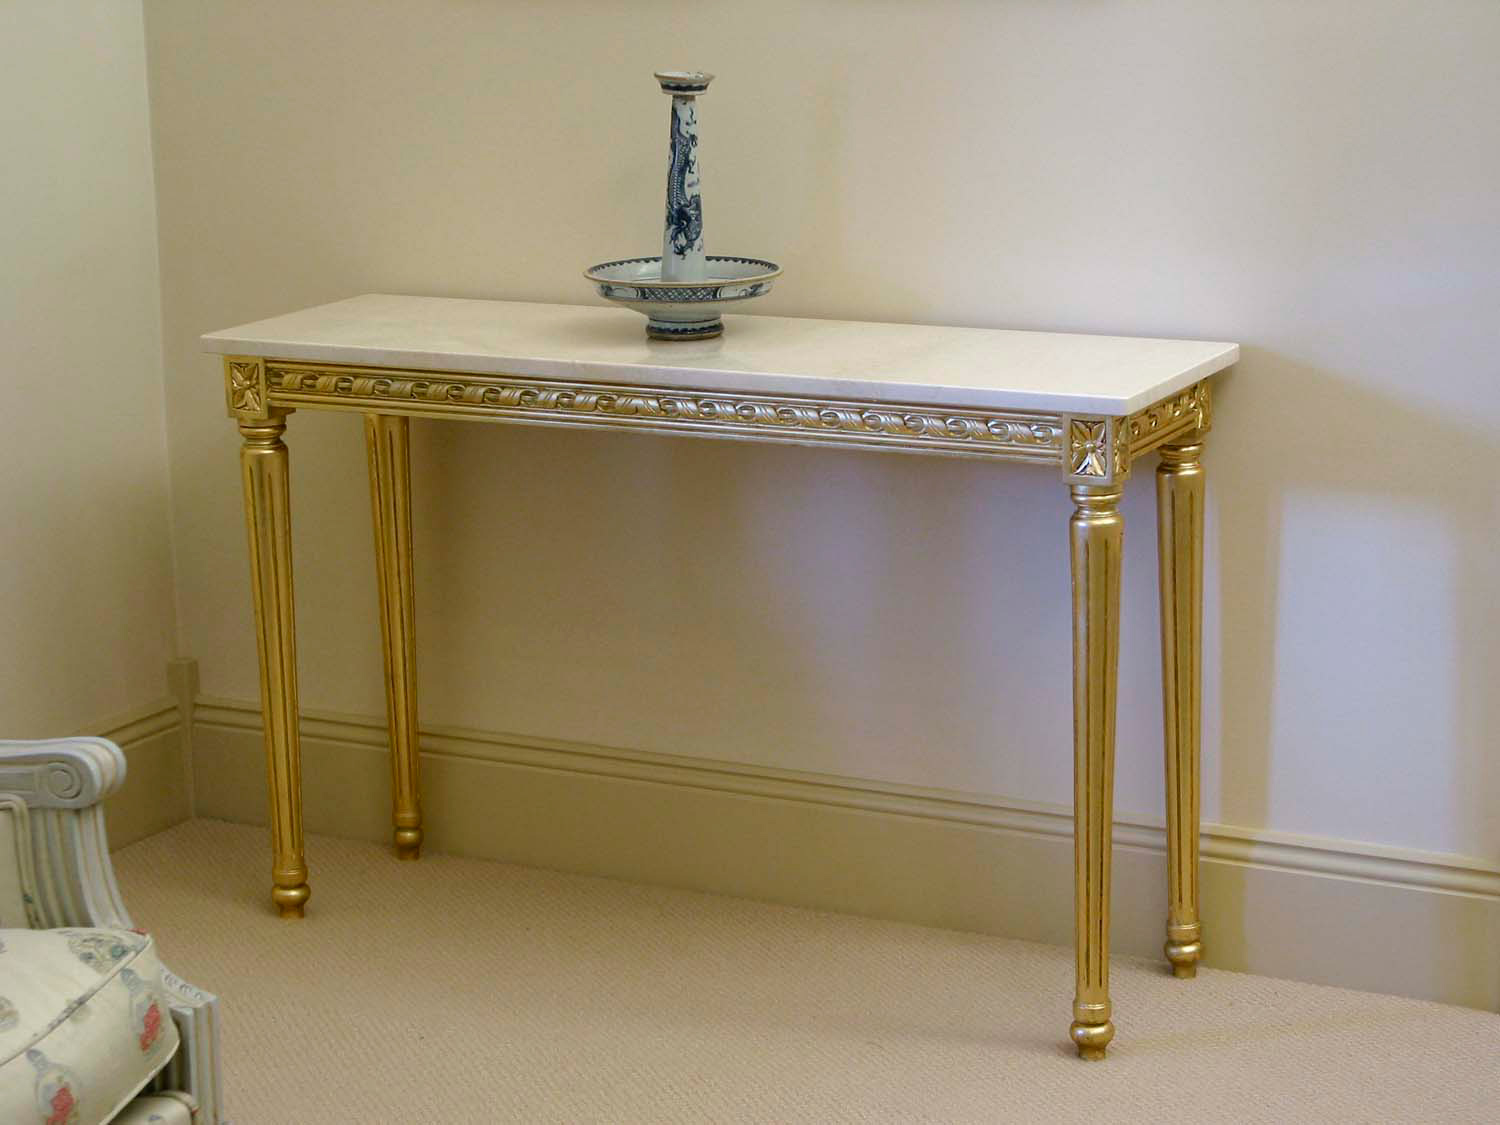 12 French gilded furniture finishes